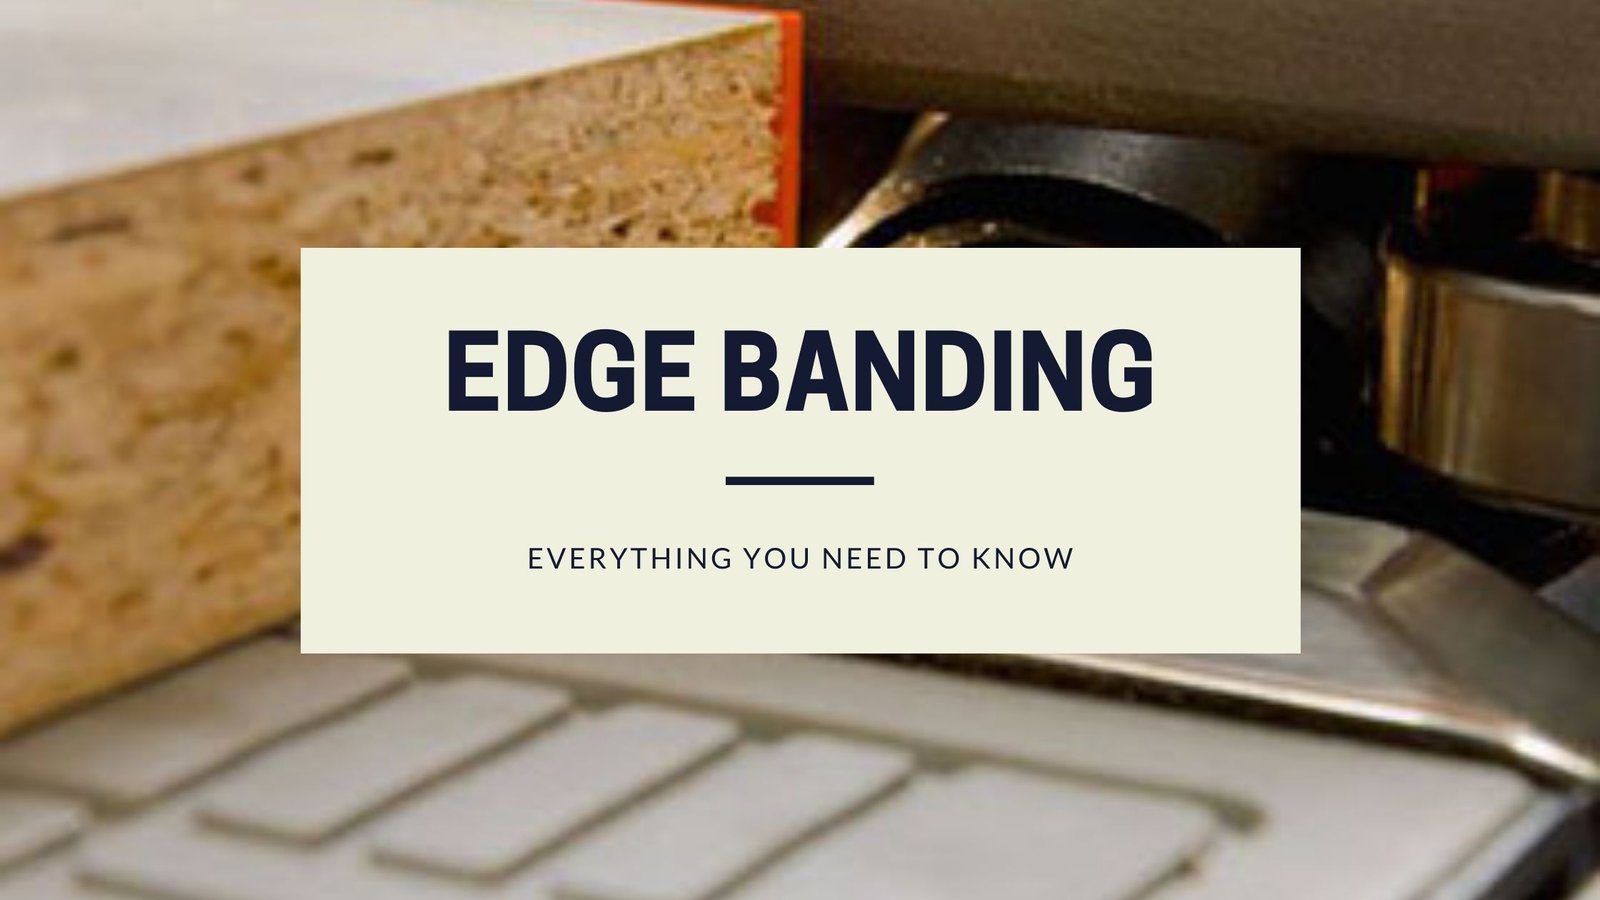 Edge banding: All you need to know & its benefits